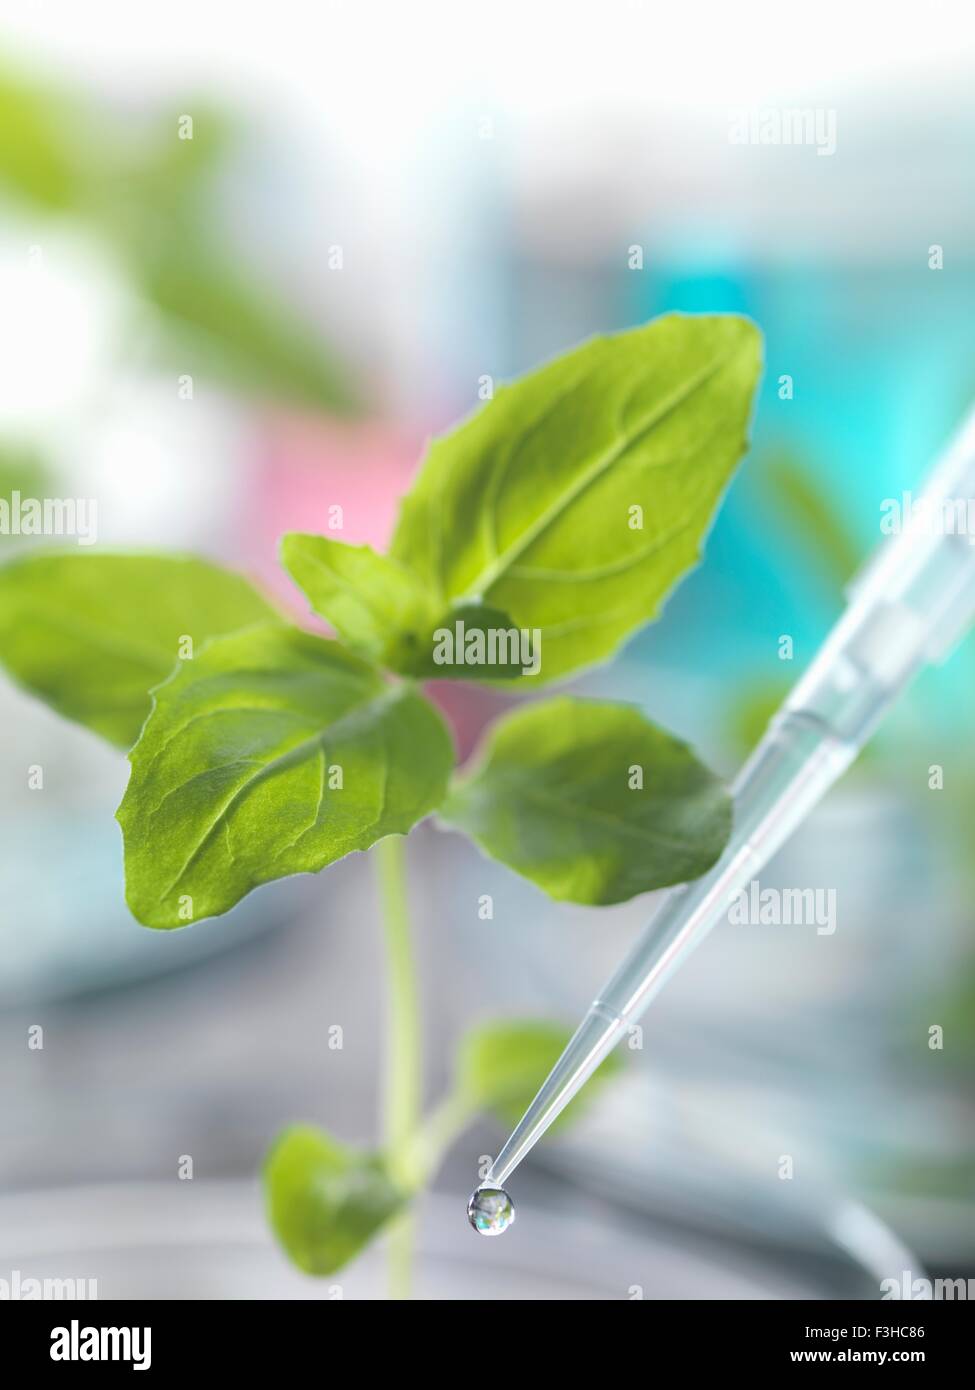 Pipette dropping test sample onto seedling in petri dish Stock Photo